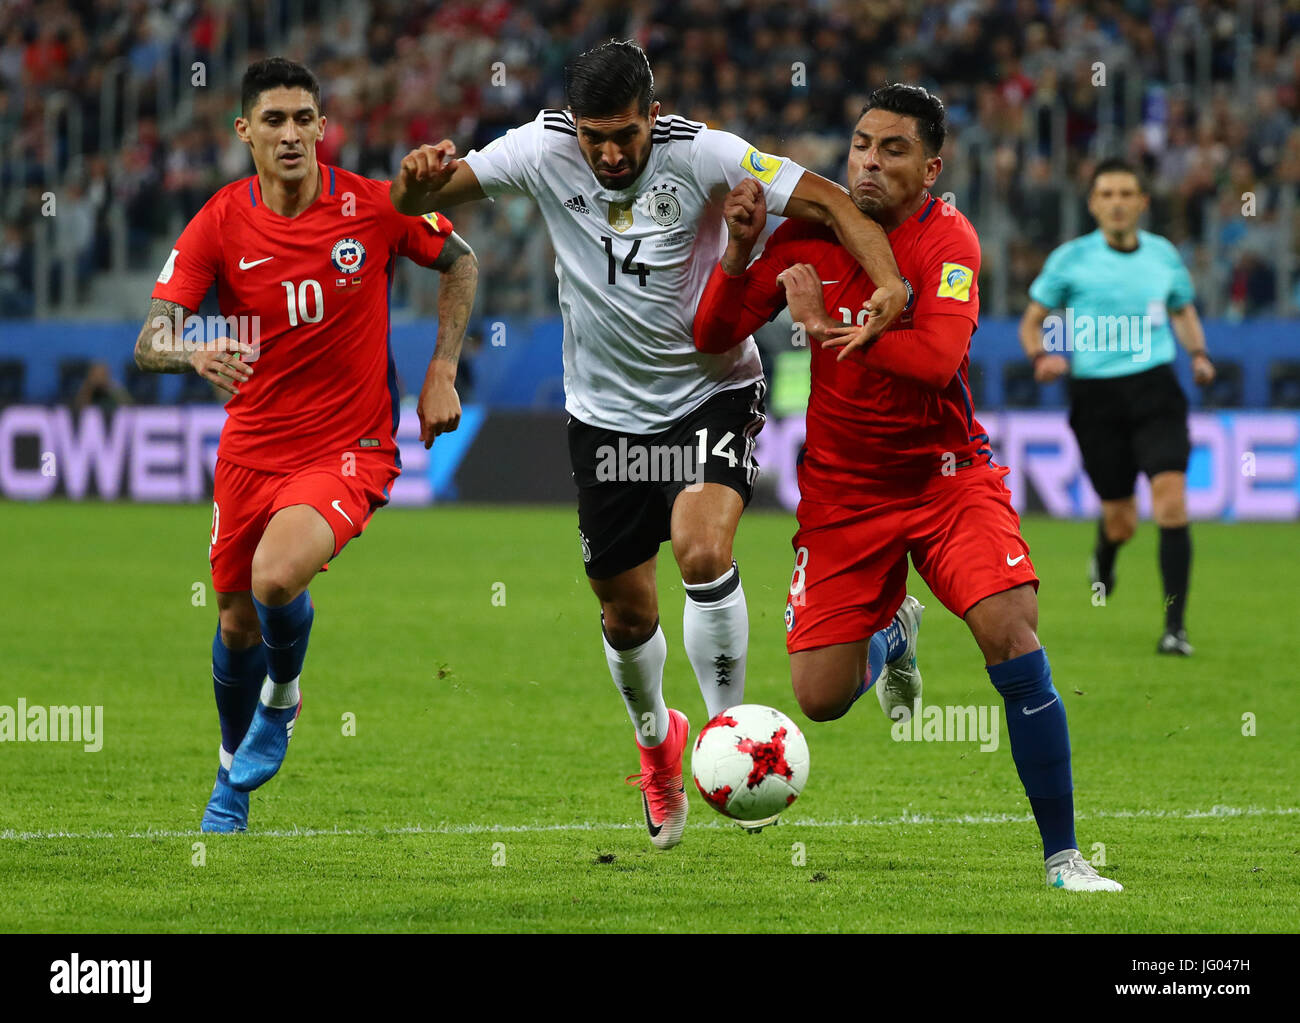 Saint Petersburg, Russia. 2nd July, 2017. Germany's Emre Can (c) and Chile's Pablo Hernandez (l) and Gonzalo Jara in action during the Confederations Cup finale between Chile and Germany at the Saint Petersburg Stadium in Saint Petersburg, Russia, 2 July 2017. Photo: Christian Charisius/dpa/Alamy Live News Stock Photo